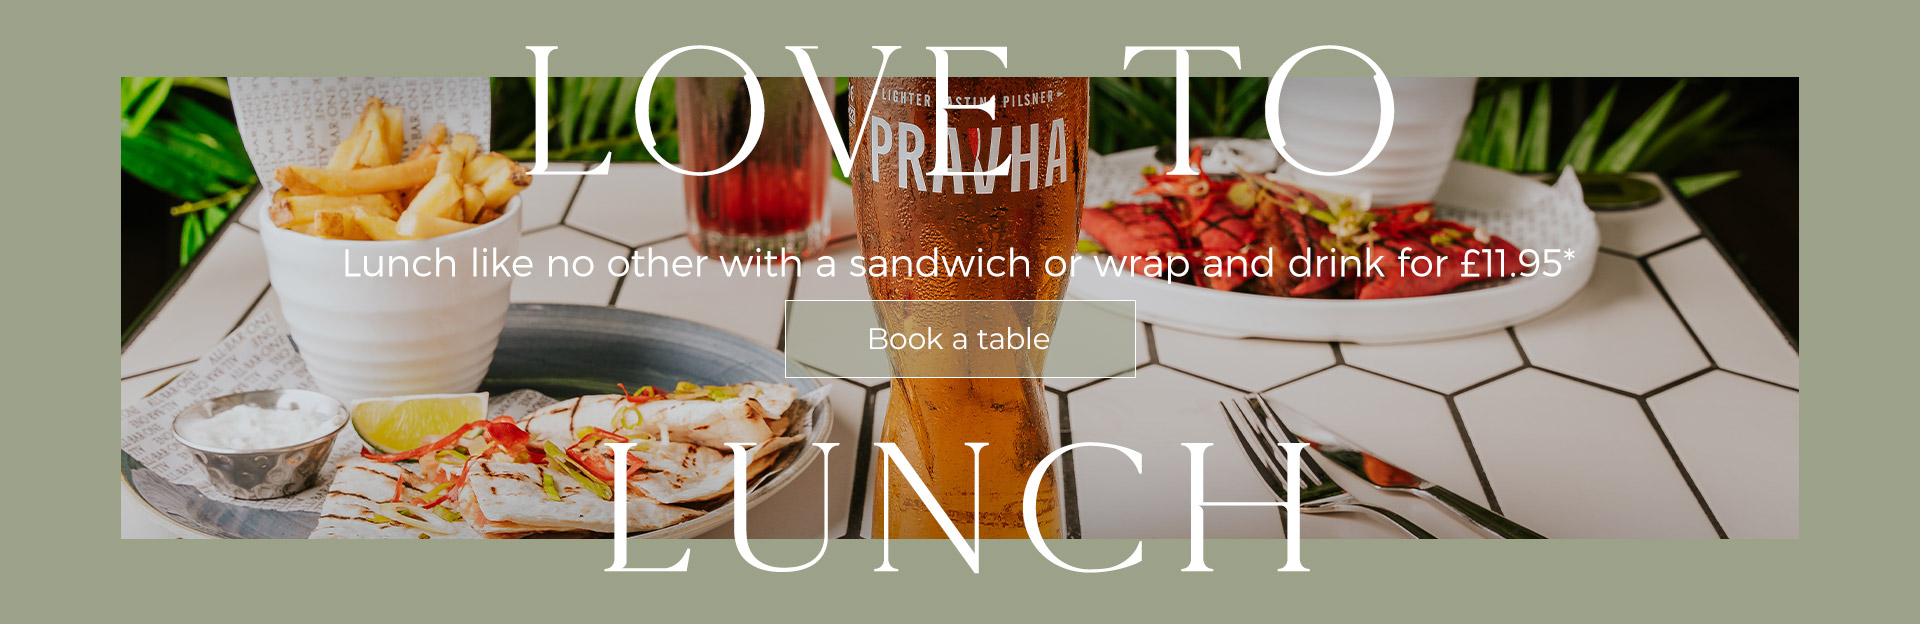 Lunch Offer at All Bar One Holborn